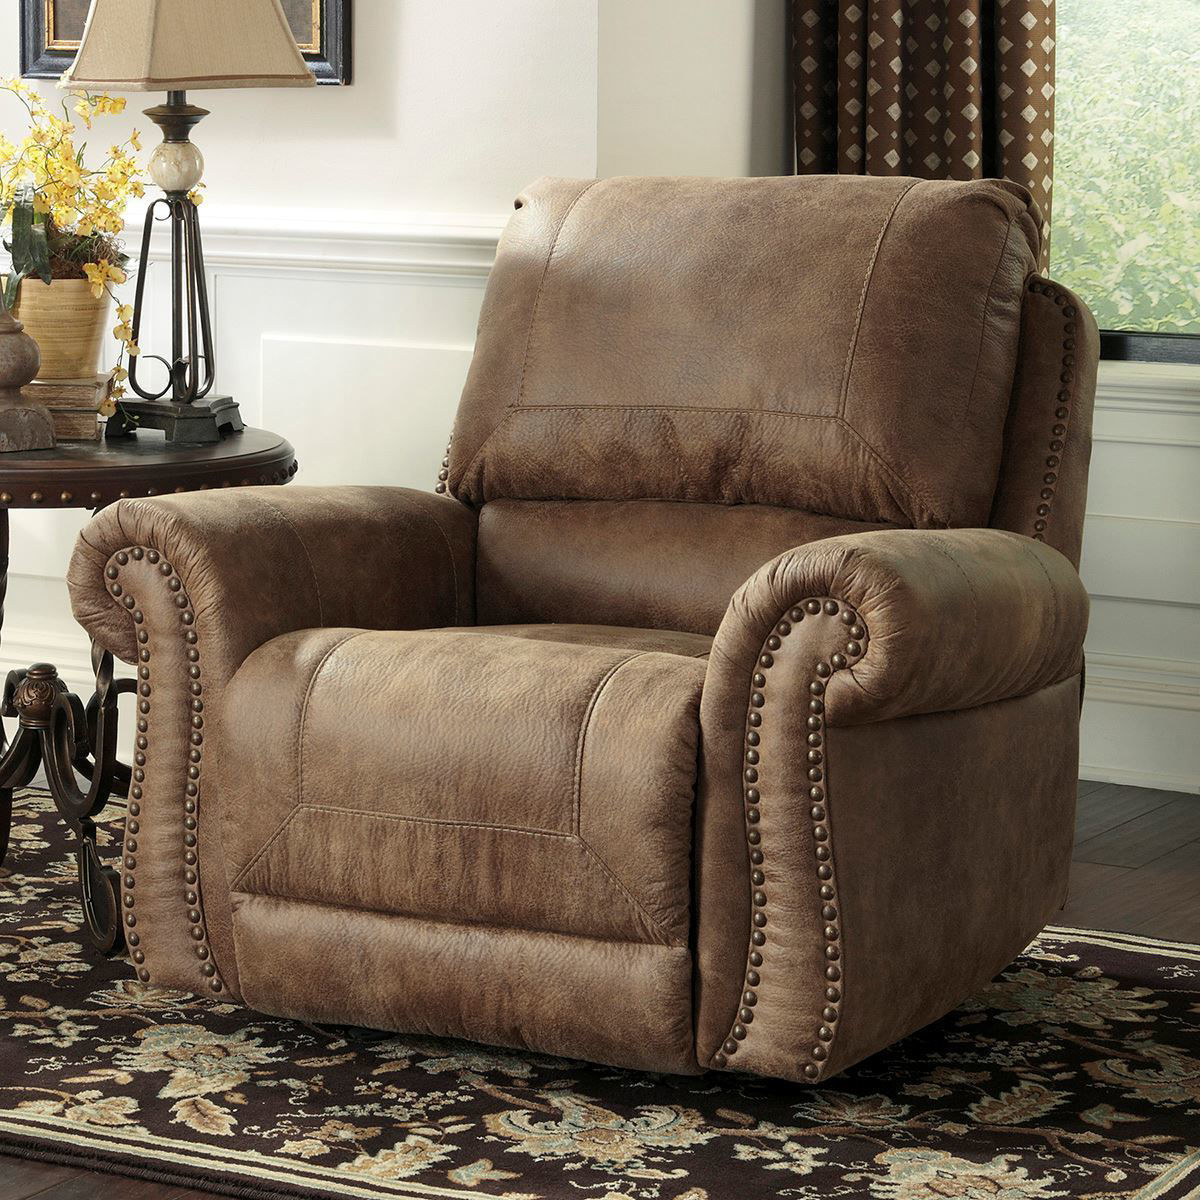 maddy-rocker-recliner-living-room-chairs-lifestyle-furniture-by-babette-s